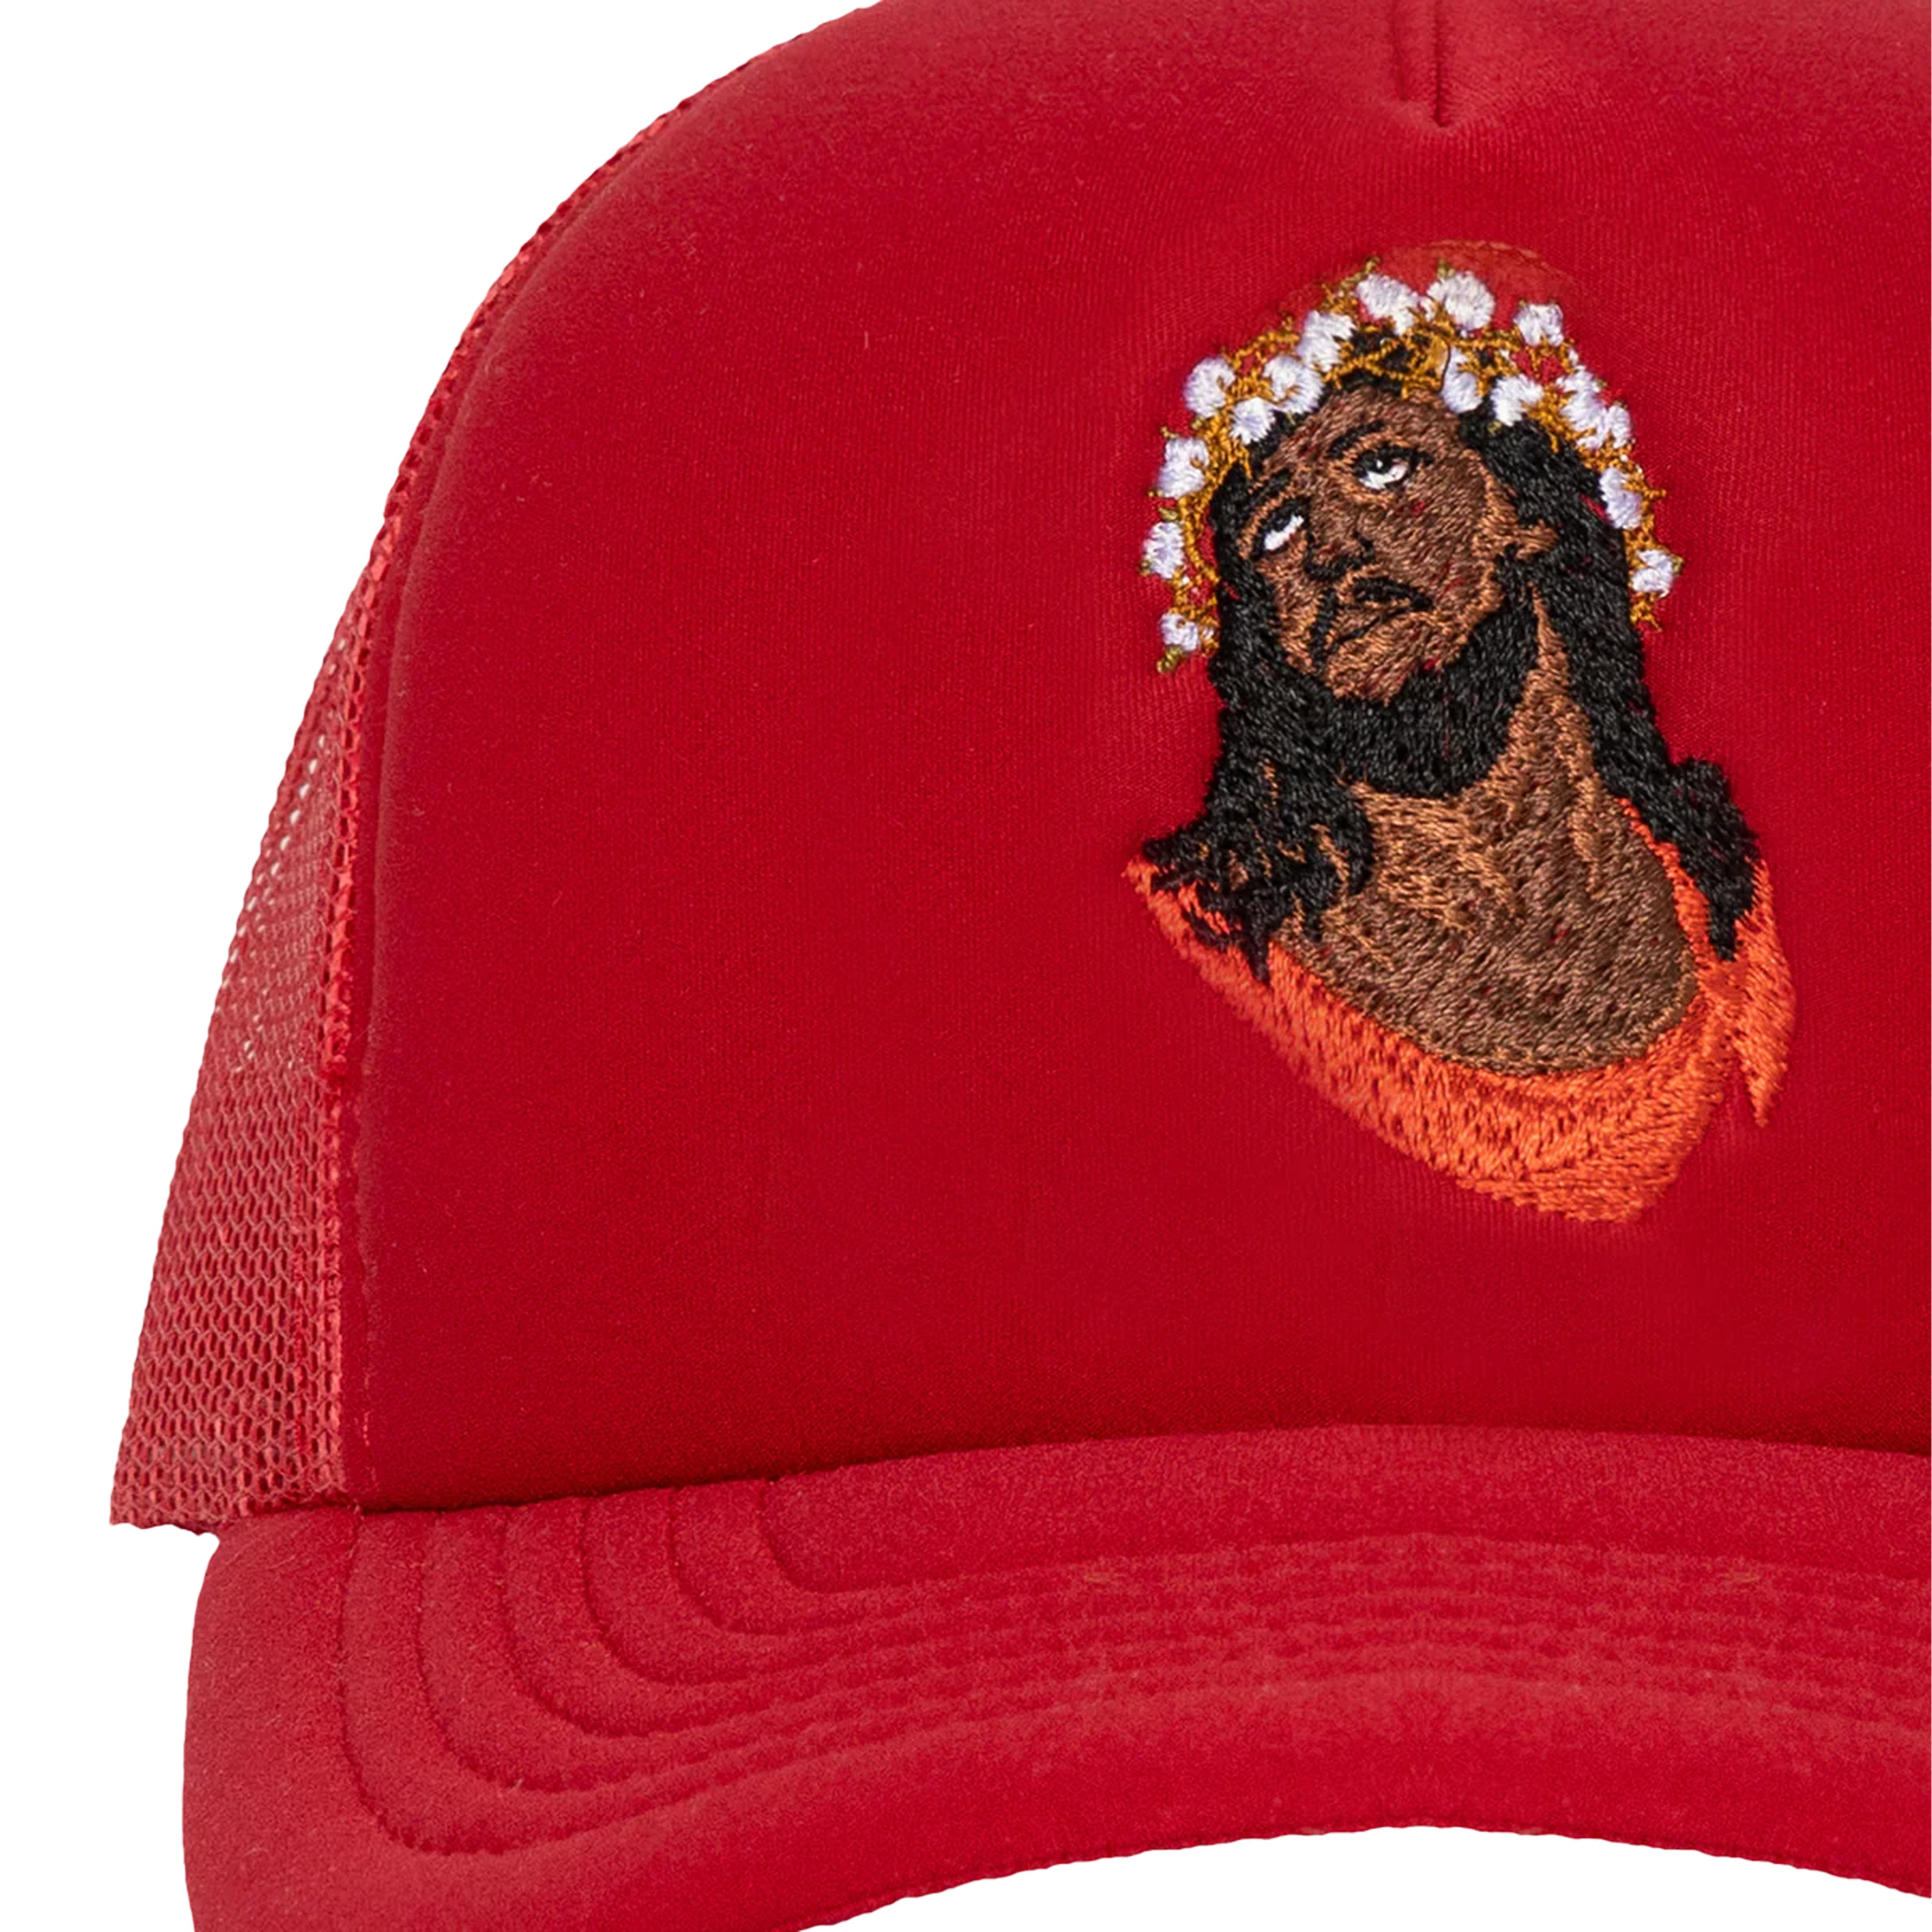 Denim Tears - Crown Made of Cotton Hat - (Red)